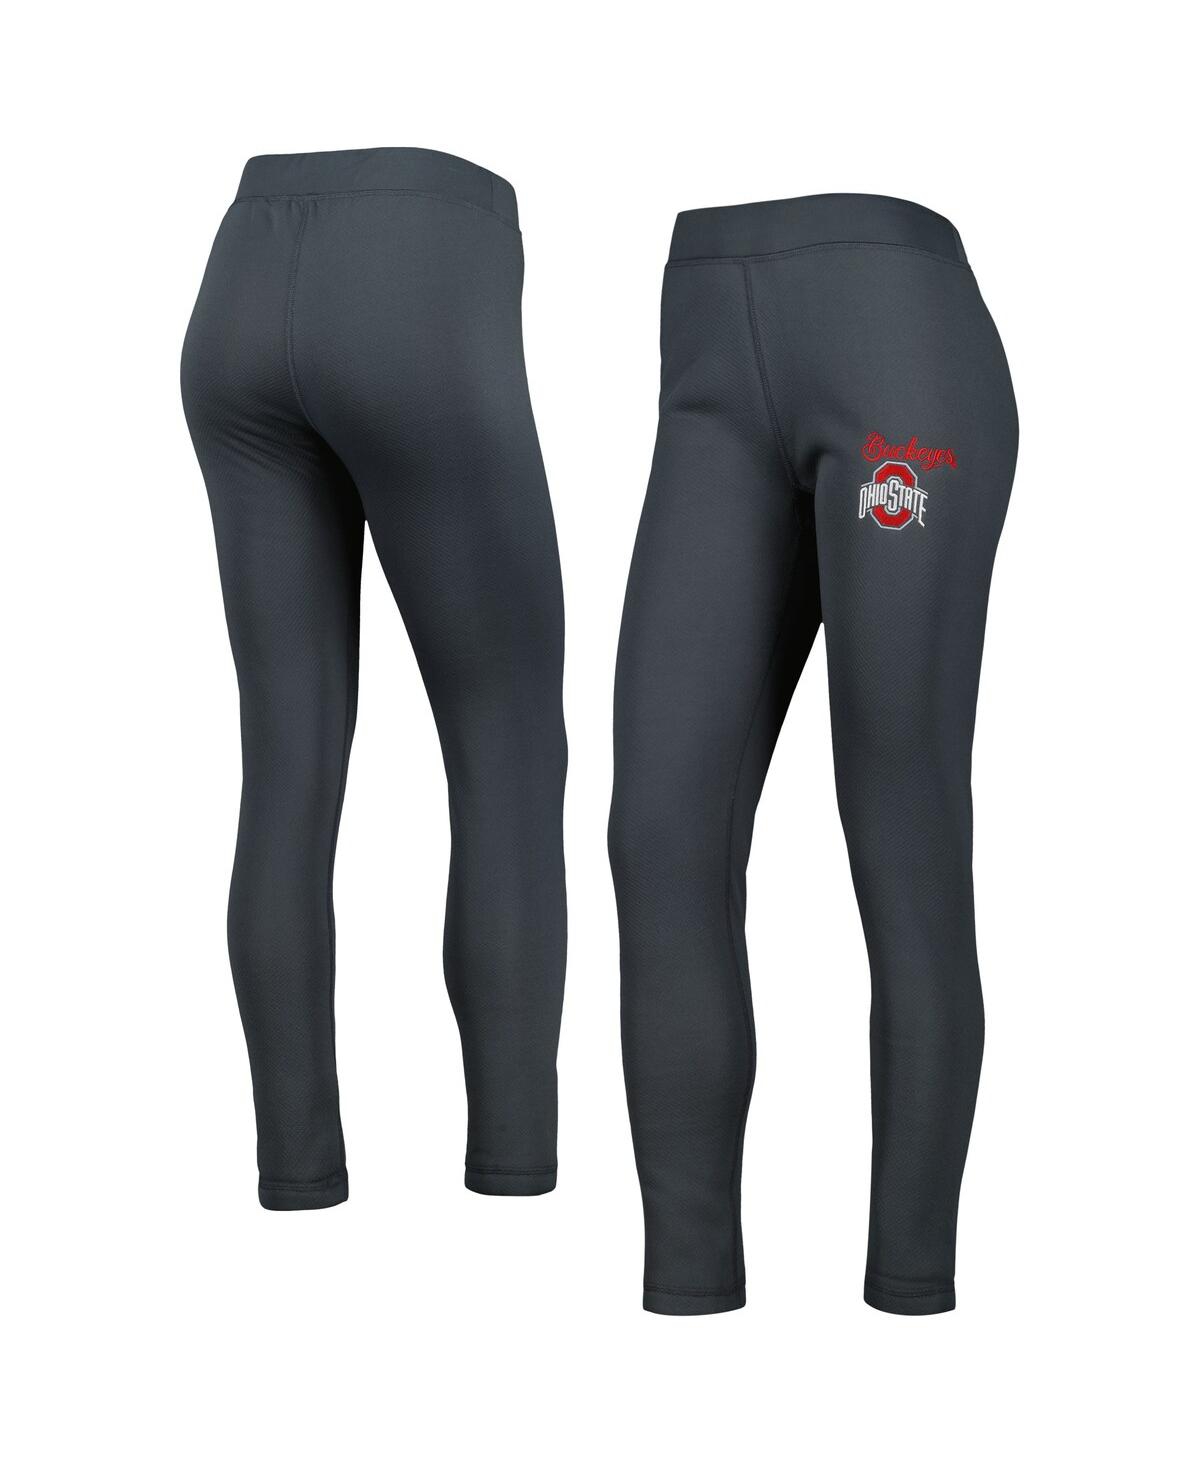 CONCEPTS SPORT WOMEN'S CONCEPTS SPORT CHARCOAL OHIO STATE BUCKEYES UPBEAT SHERPA LEGGINGS